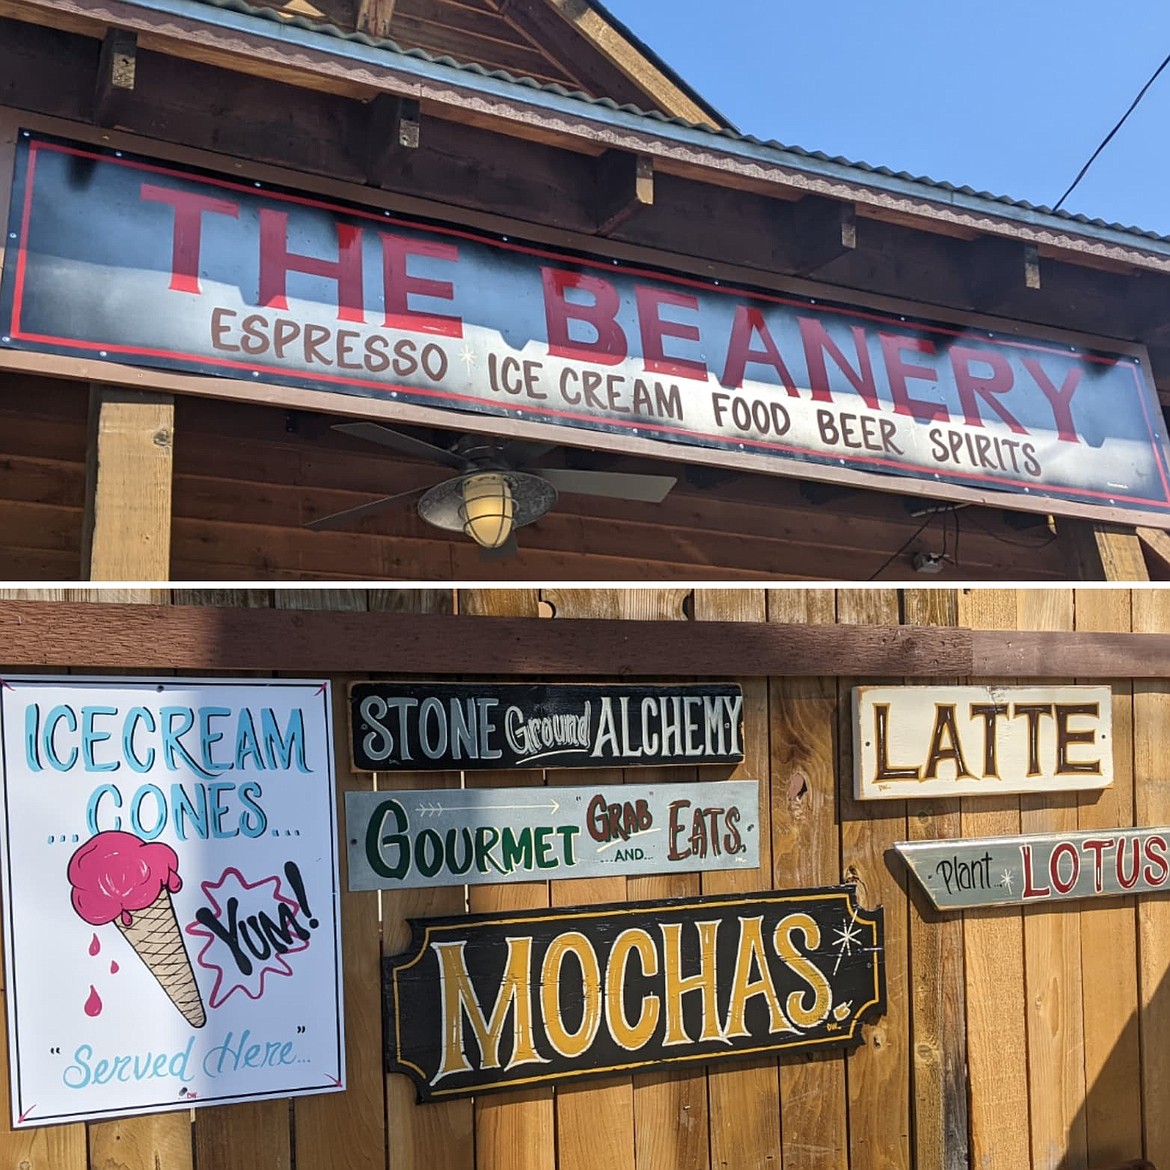 Signs made for The Beanery in Kellogg created by artist Denny Wuesthoff